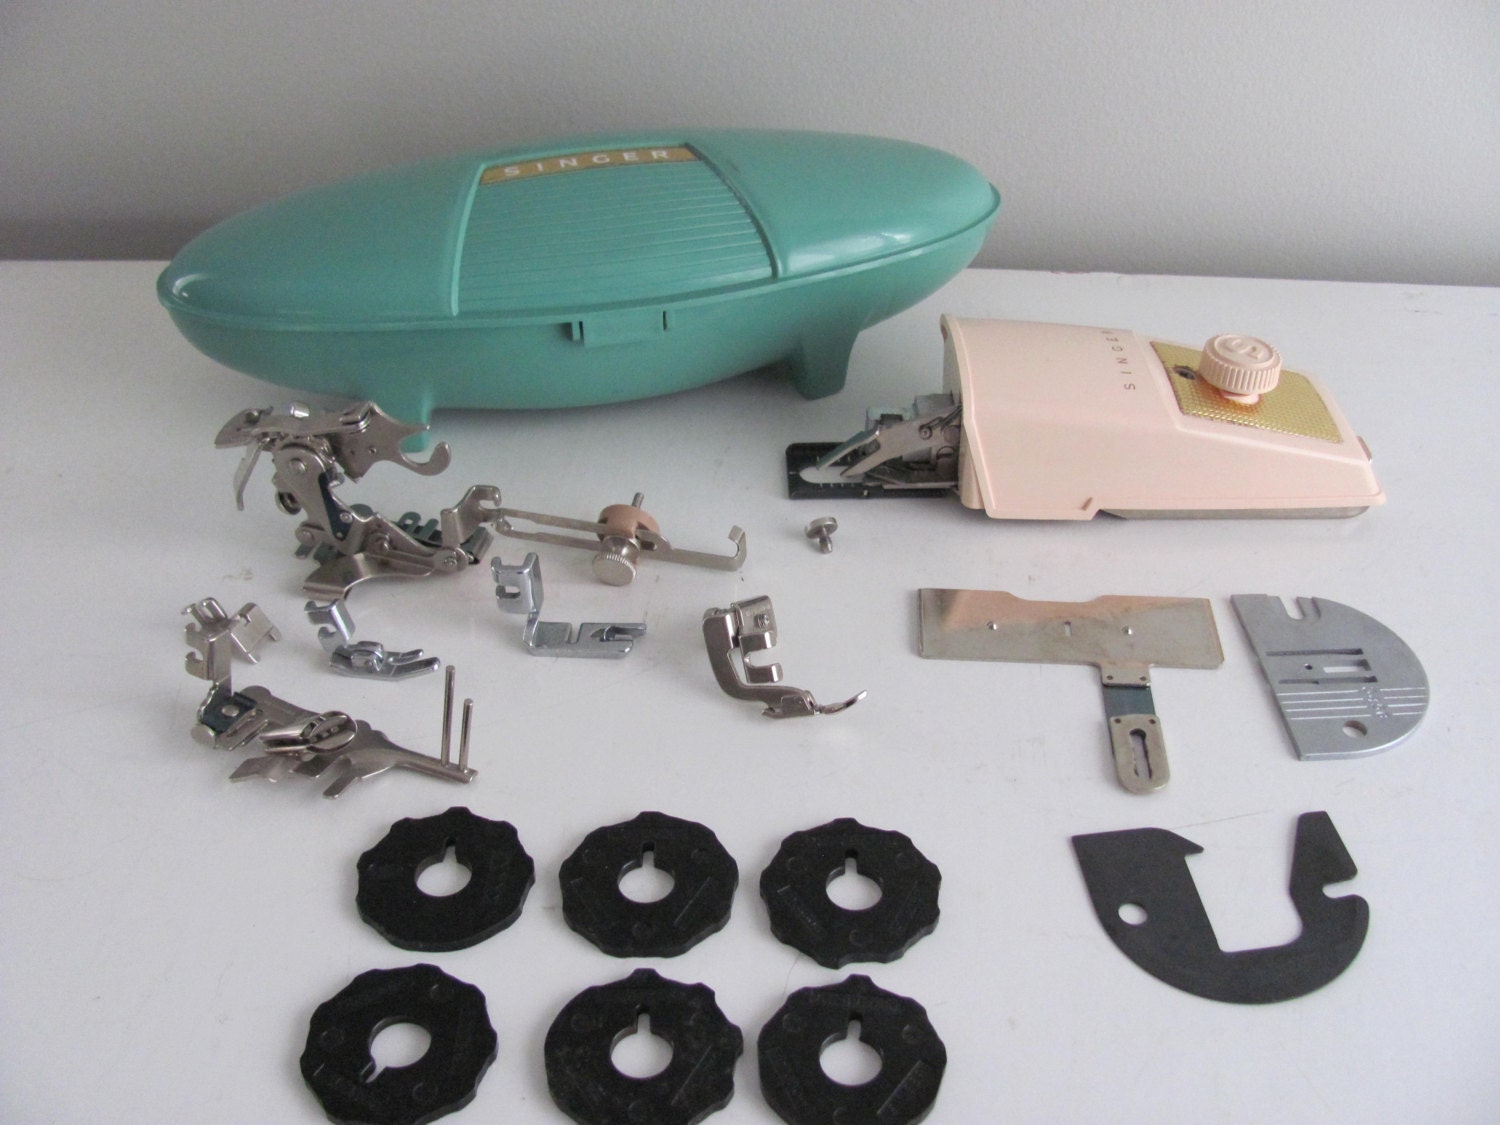 LOT Vintage Singer Sewing Machine Accessories Buttonholer, 7 assorted Feet, 6 Stitch Cams